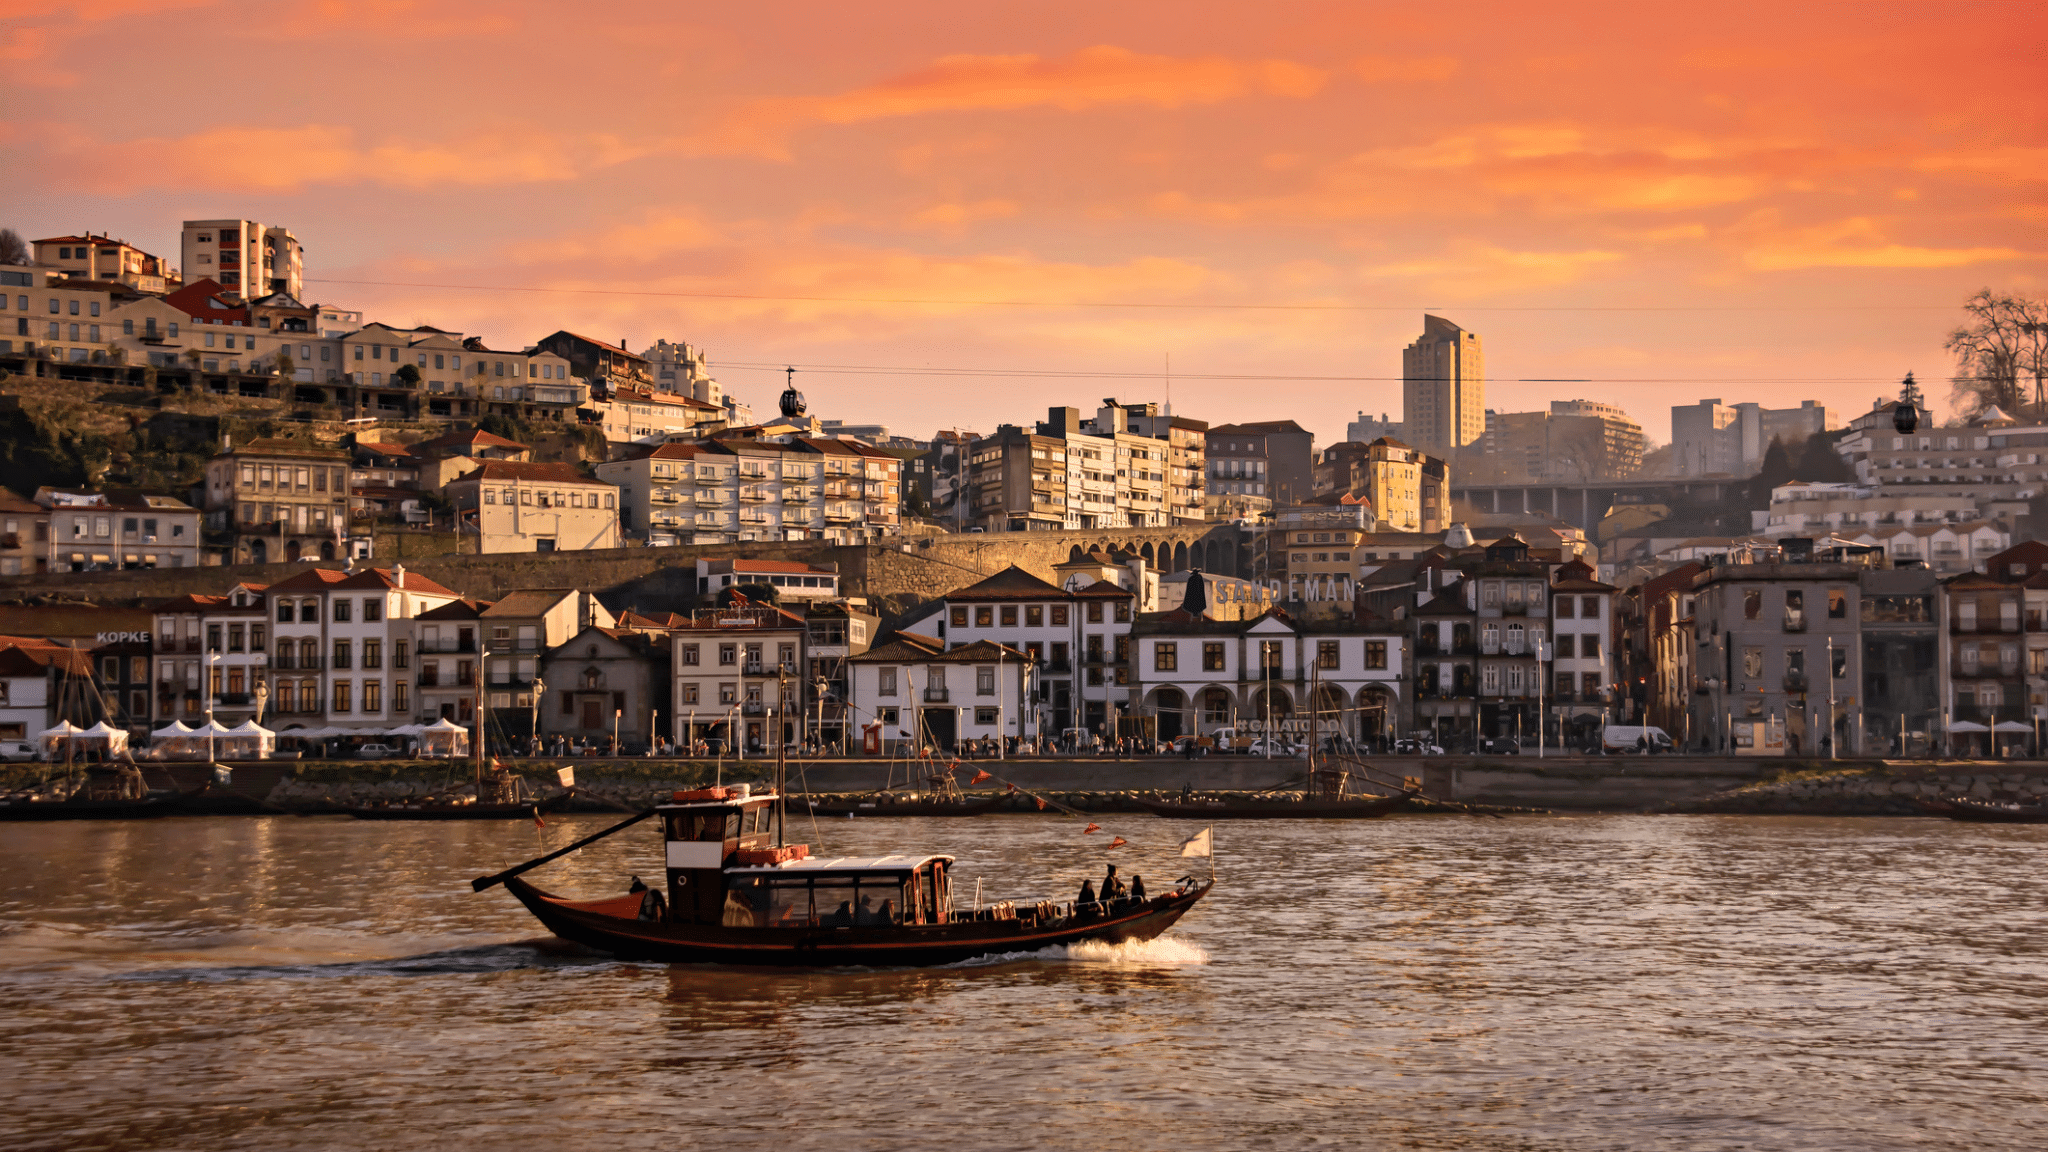 20 MEMORABLE Things to Do in PORTO, Portugal (Helpful Guide)